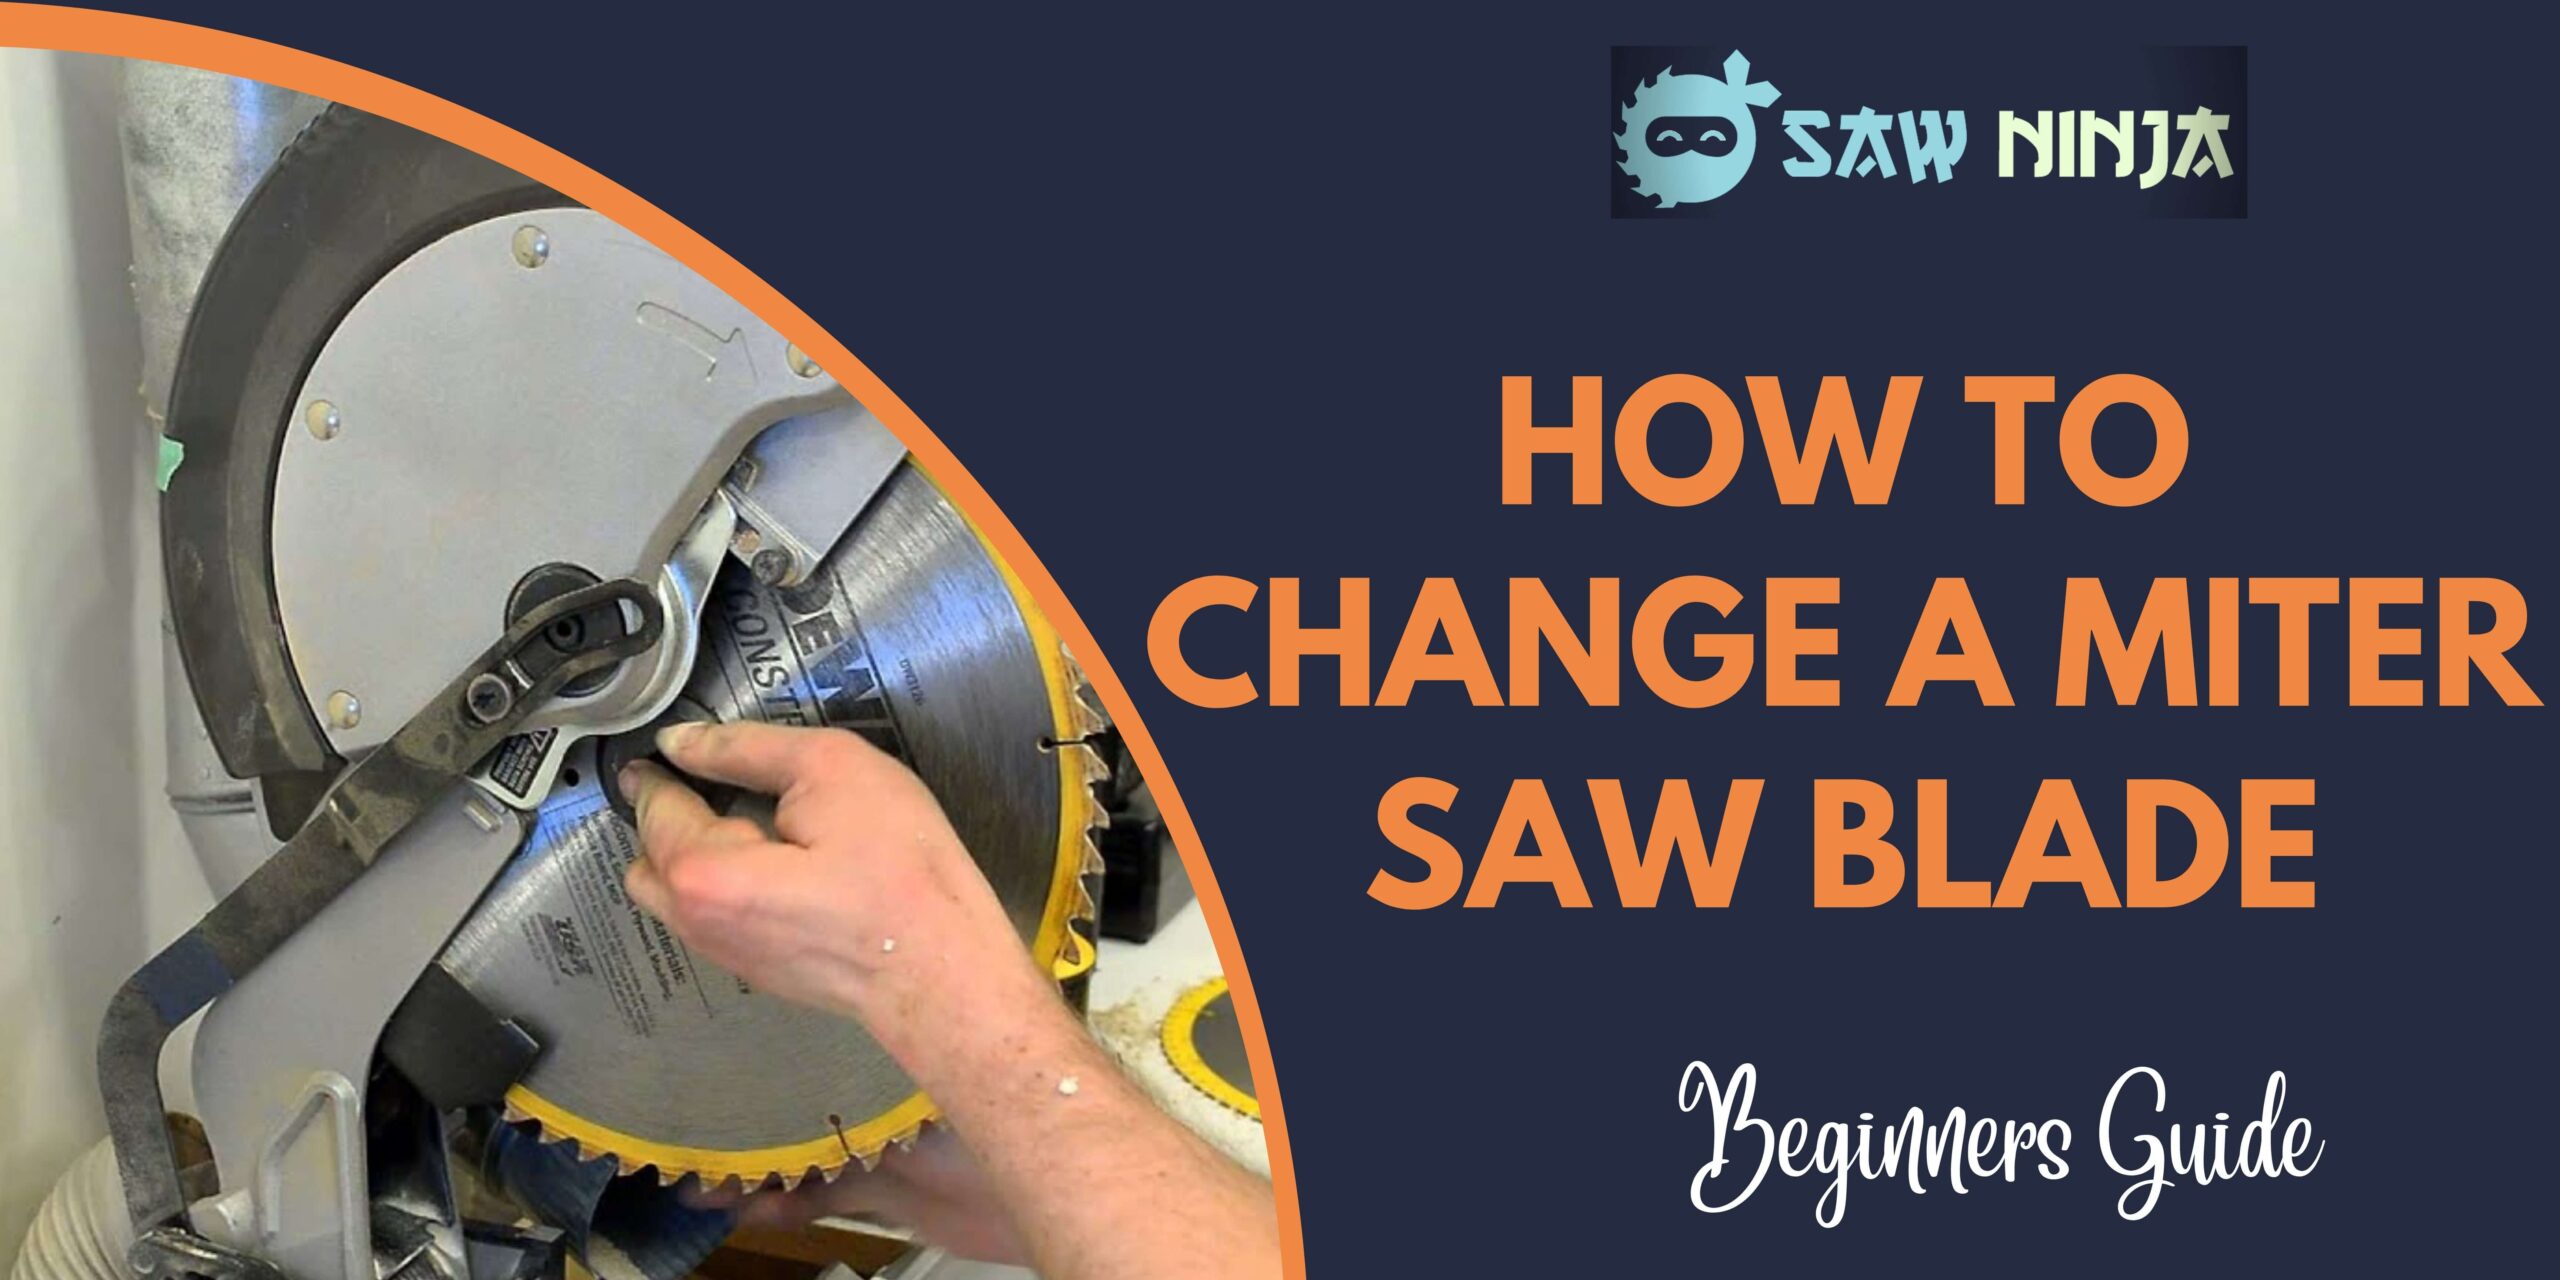 How to Change a Miter Saw Blade